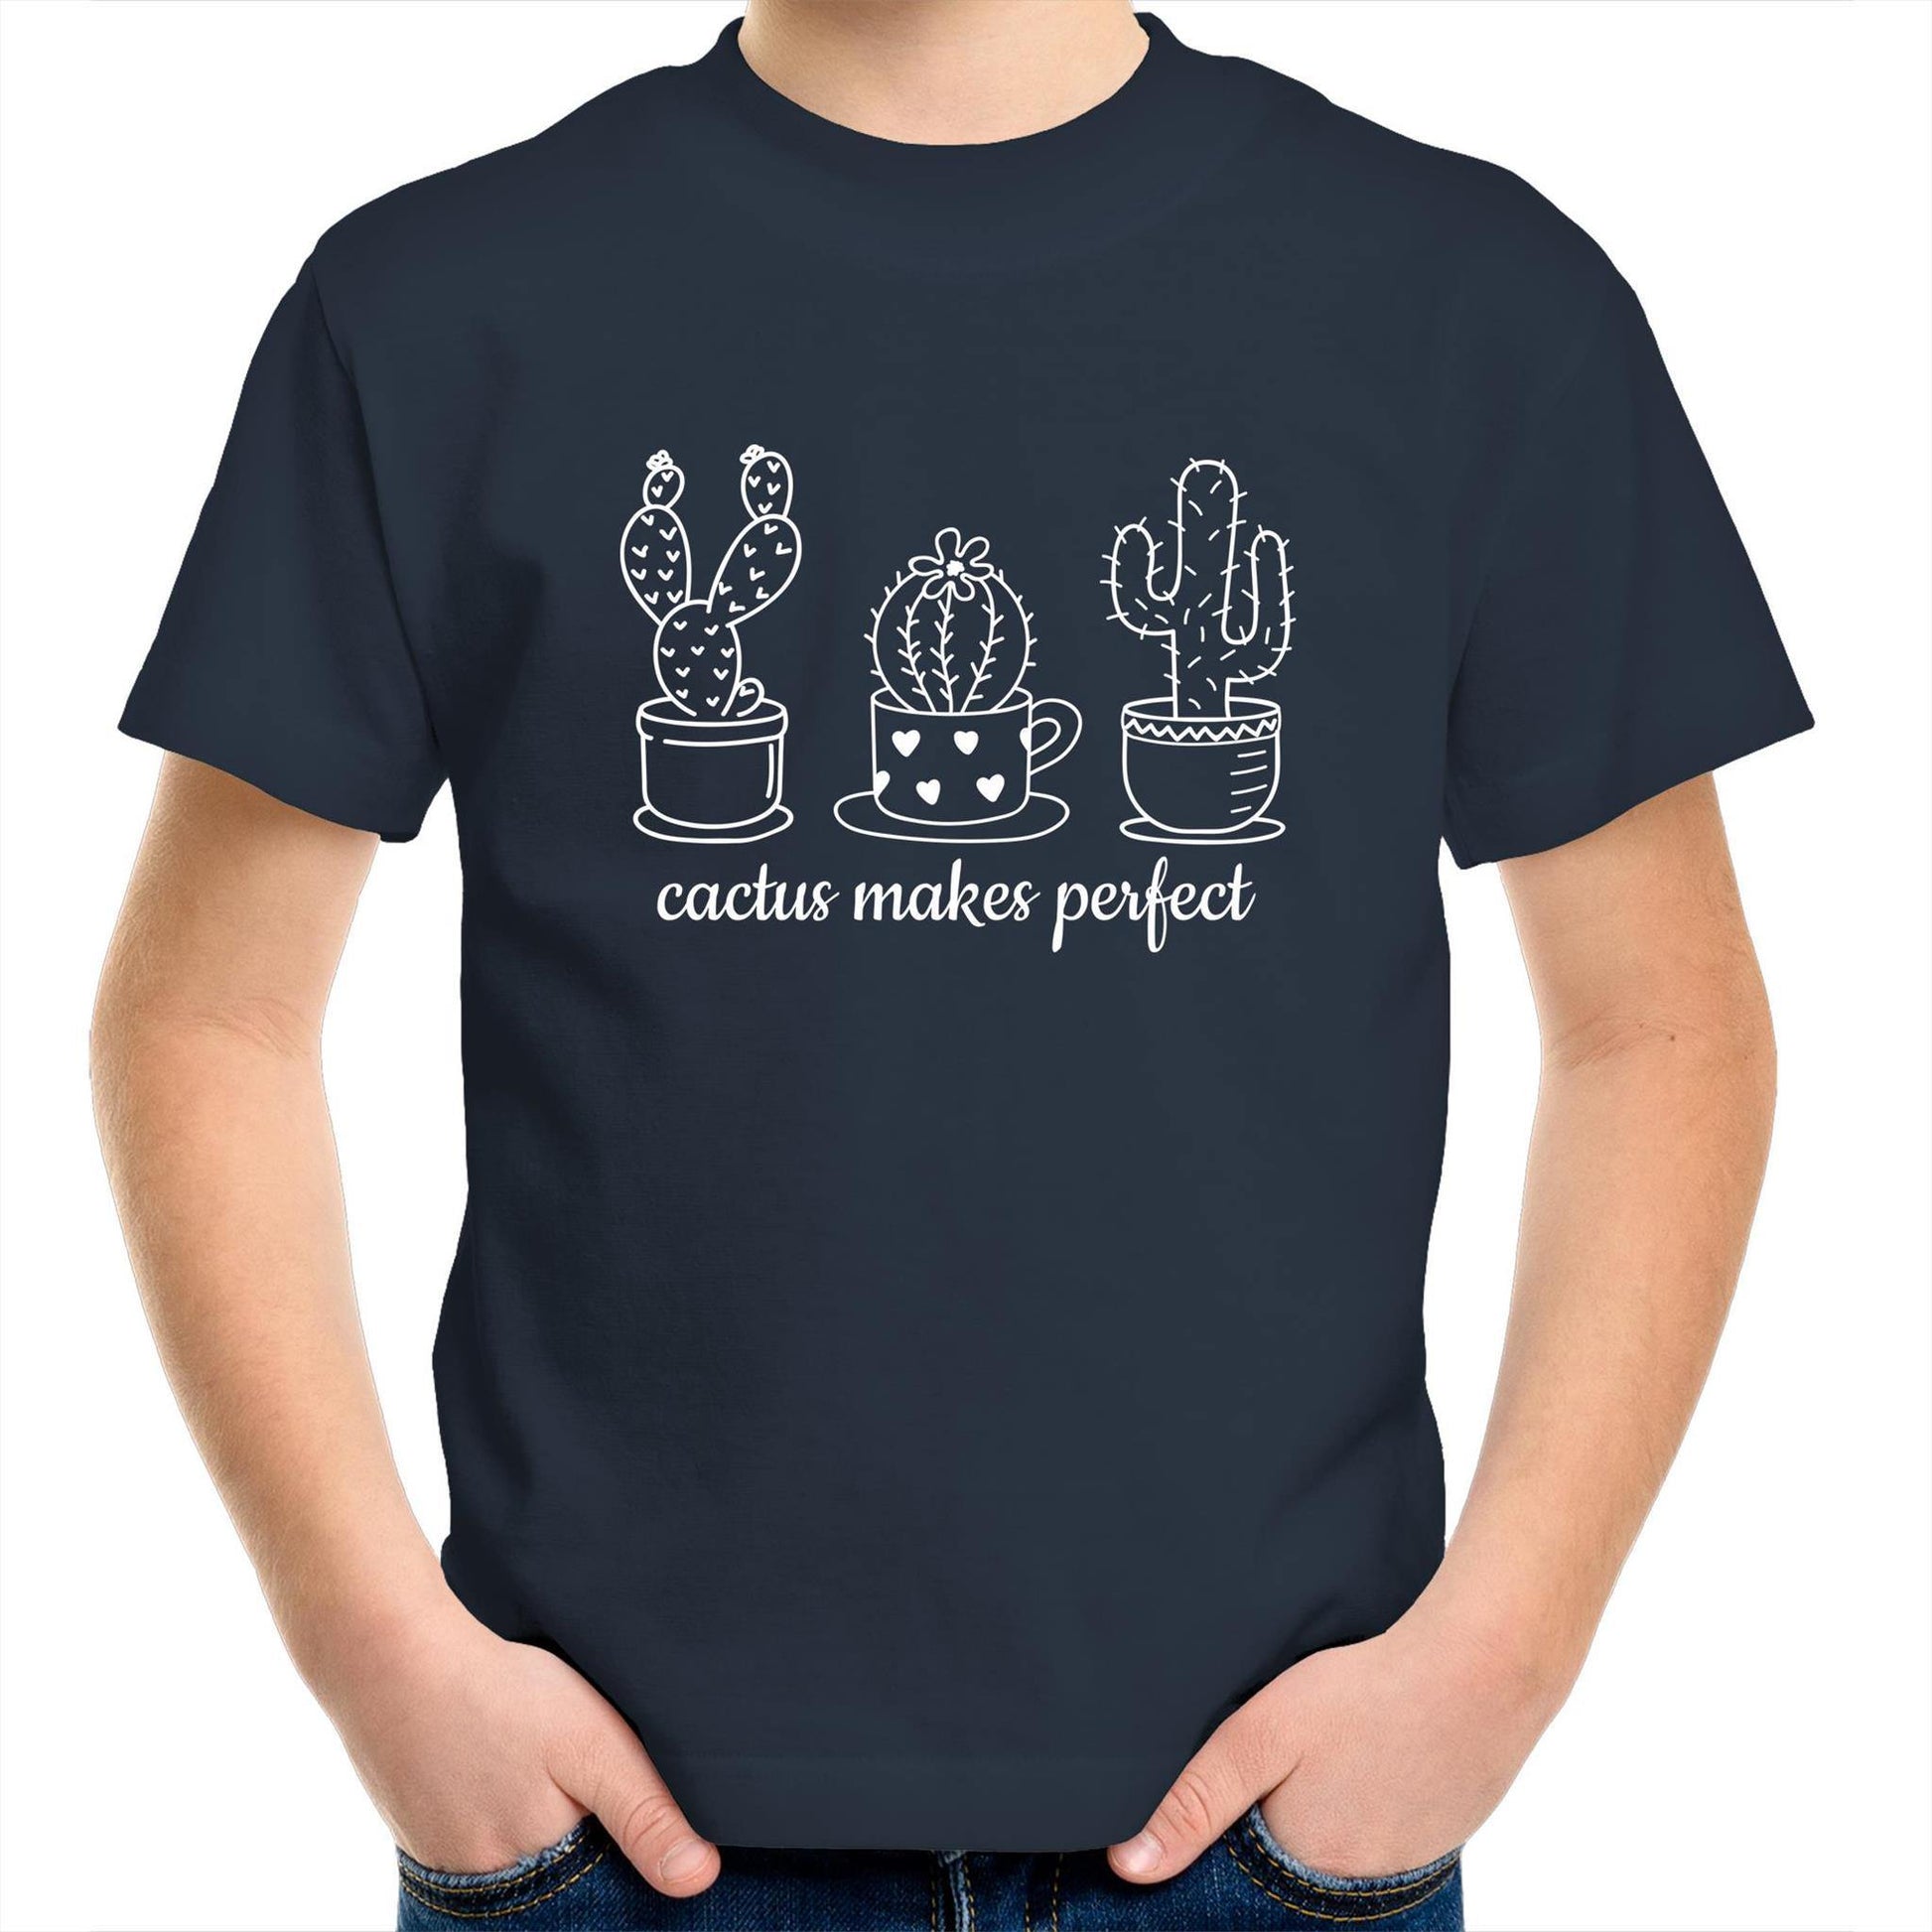 Cactus Makes Perfect - Kids Youth Crew T-Shirt Navy Kids Youth T-shirt Plants